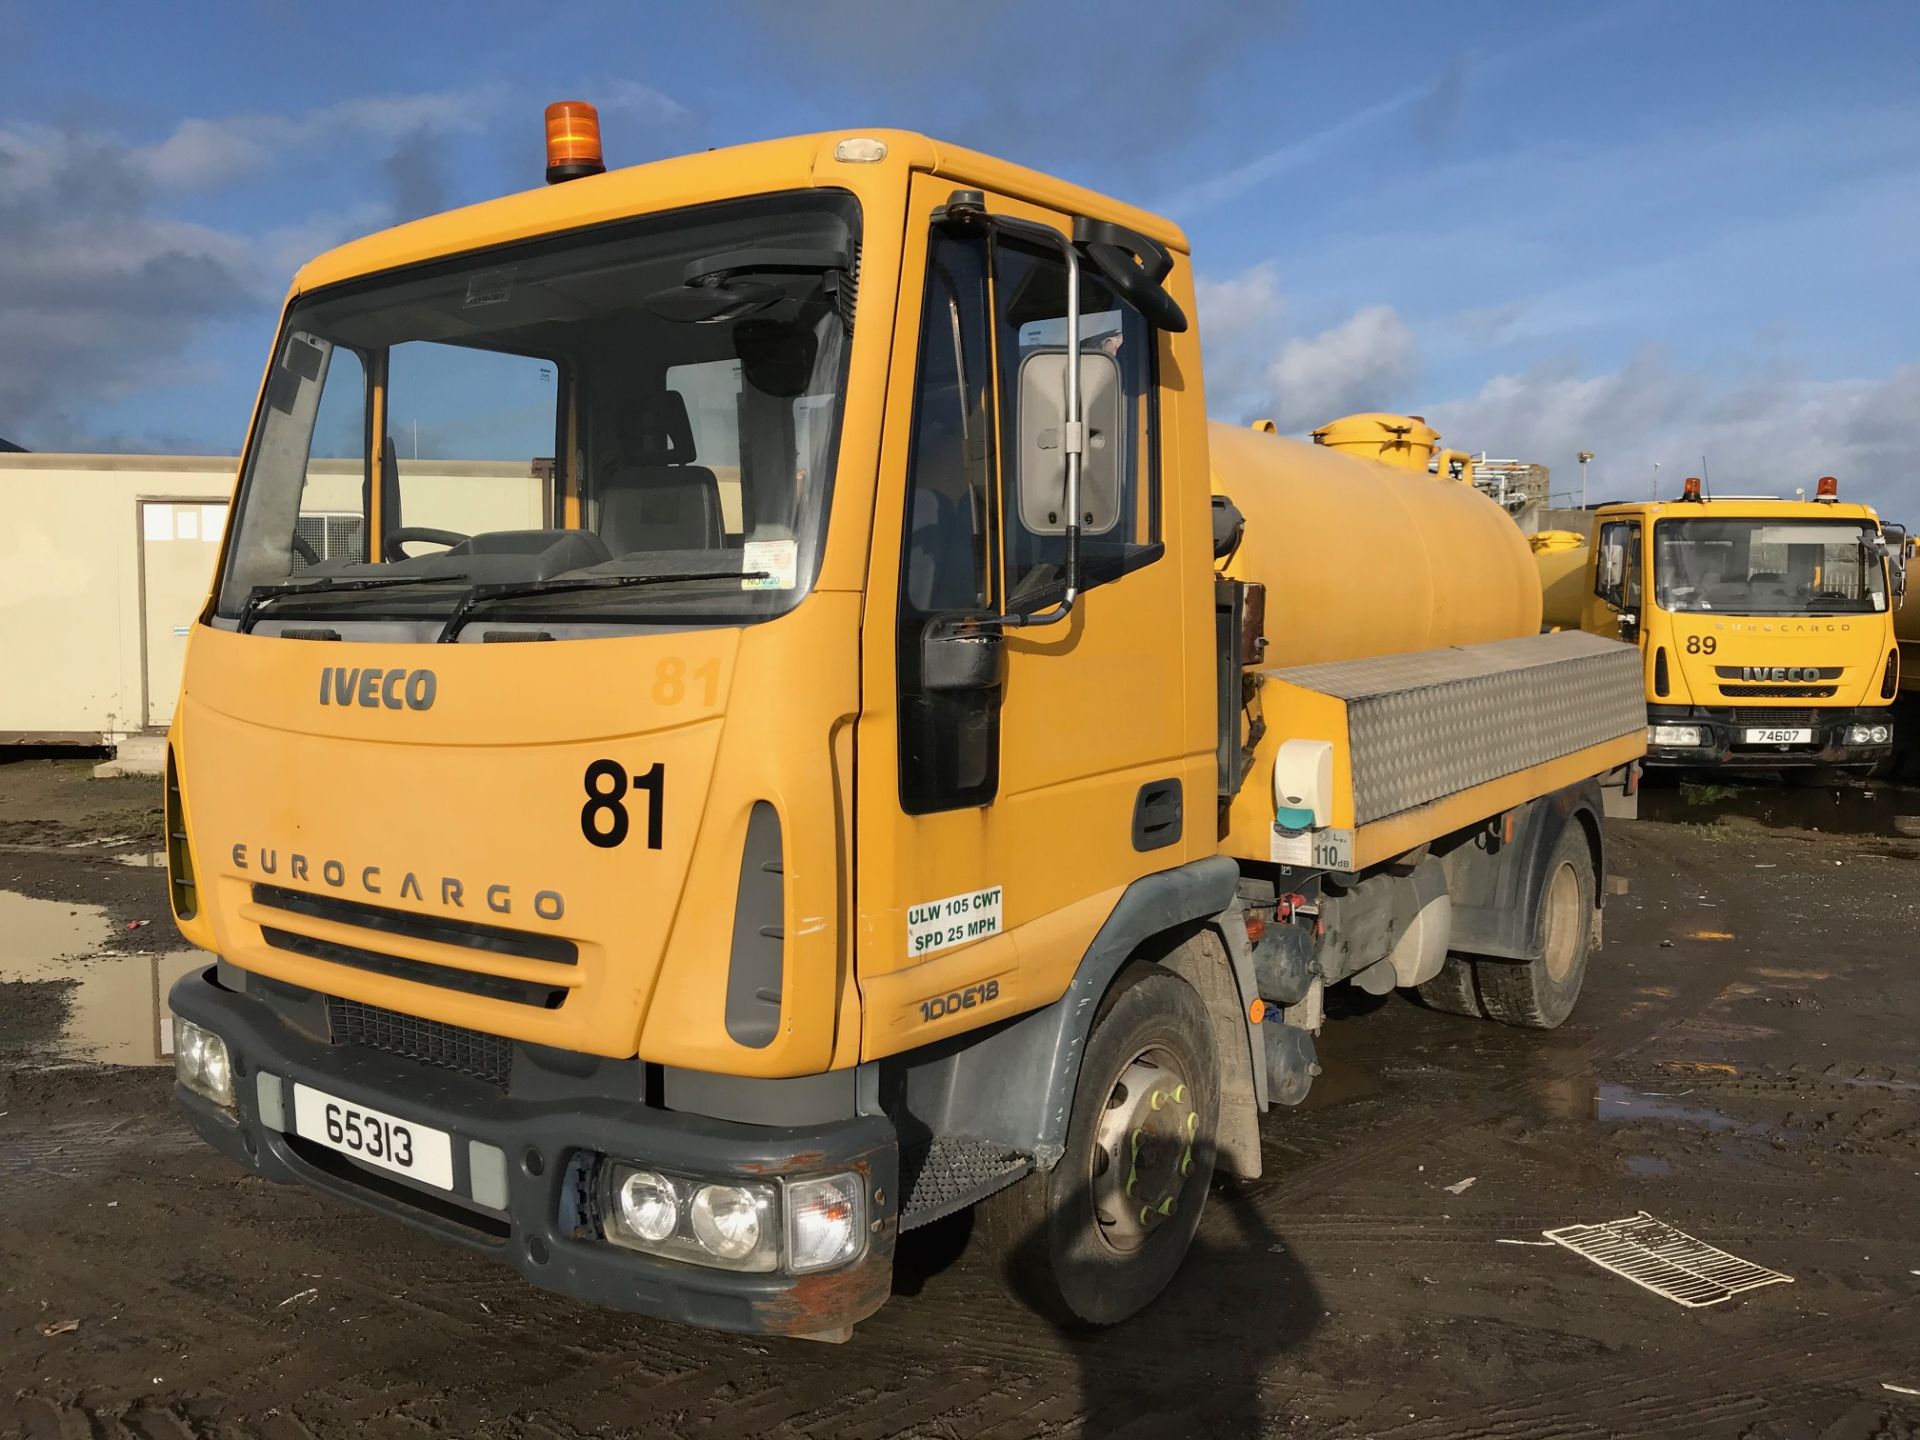 2007 Iveco 800 Gallon Gully Tanker - Image 7 of 7